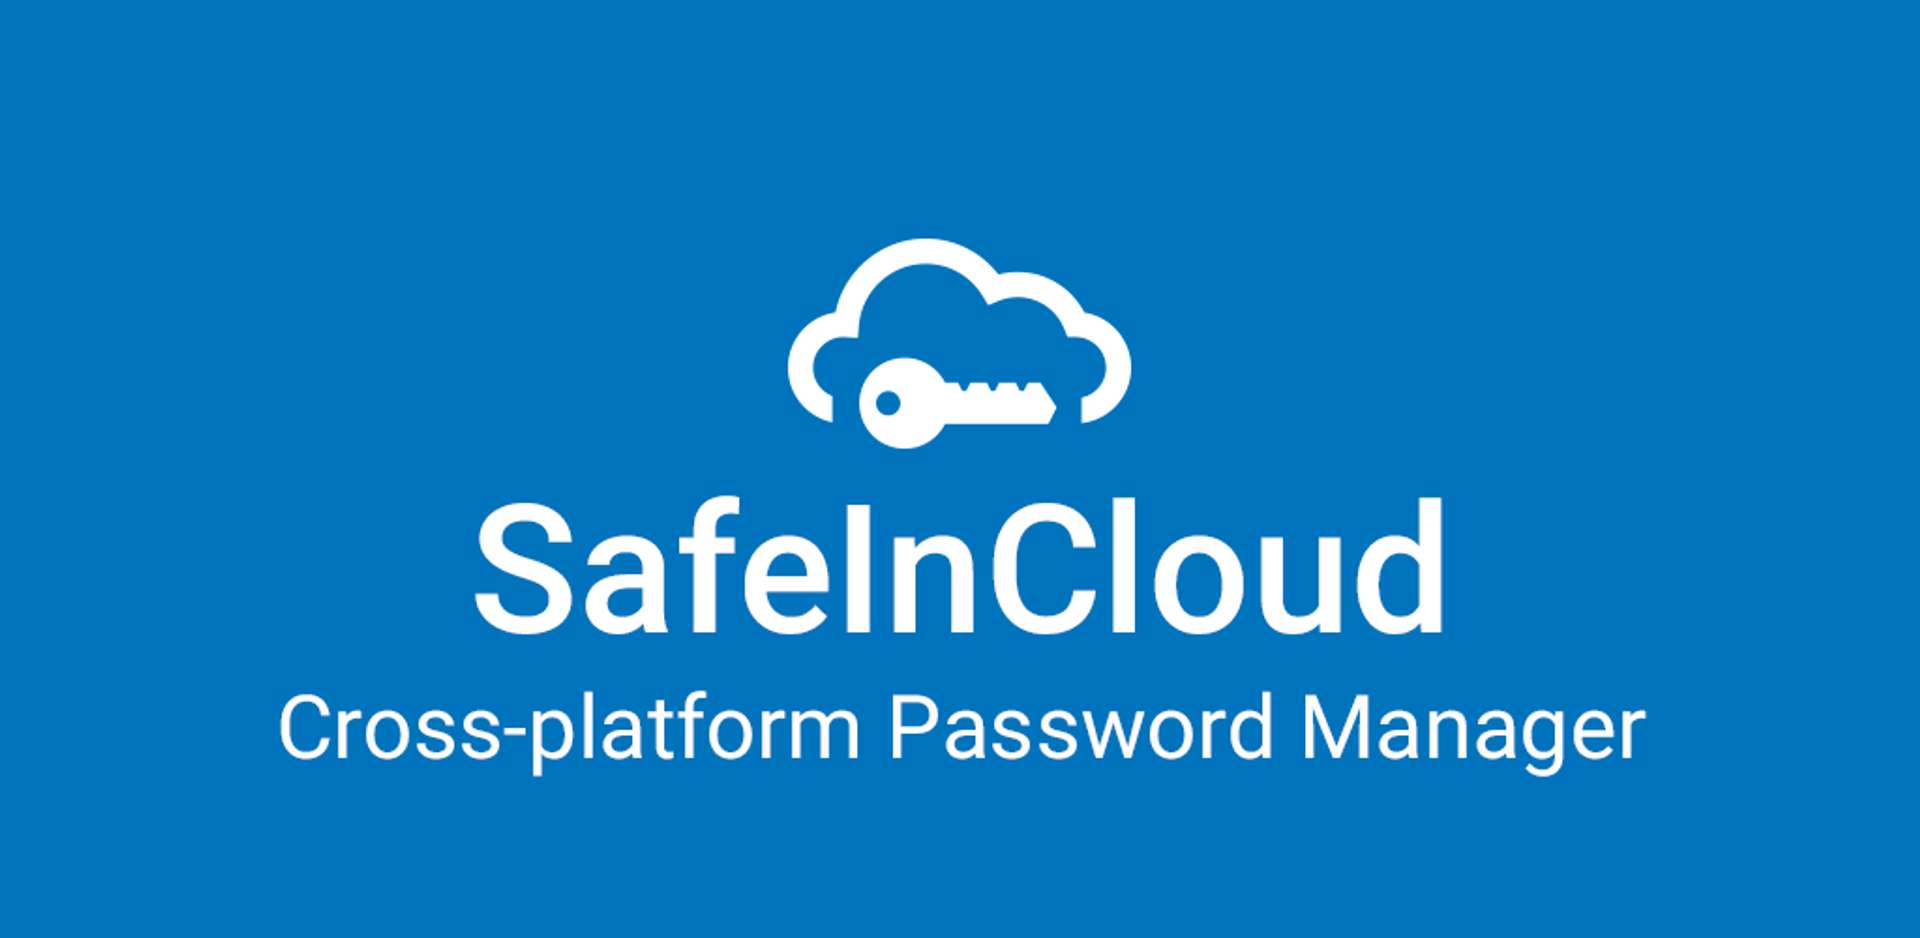 safeincloud not working on some sites